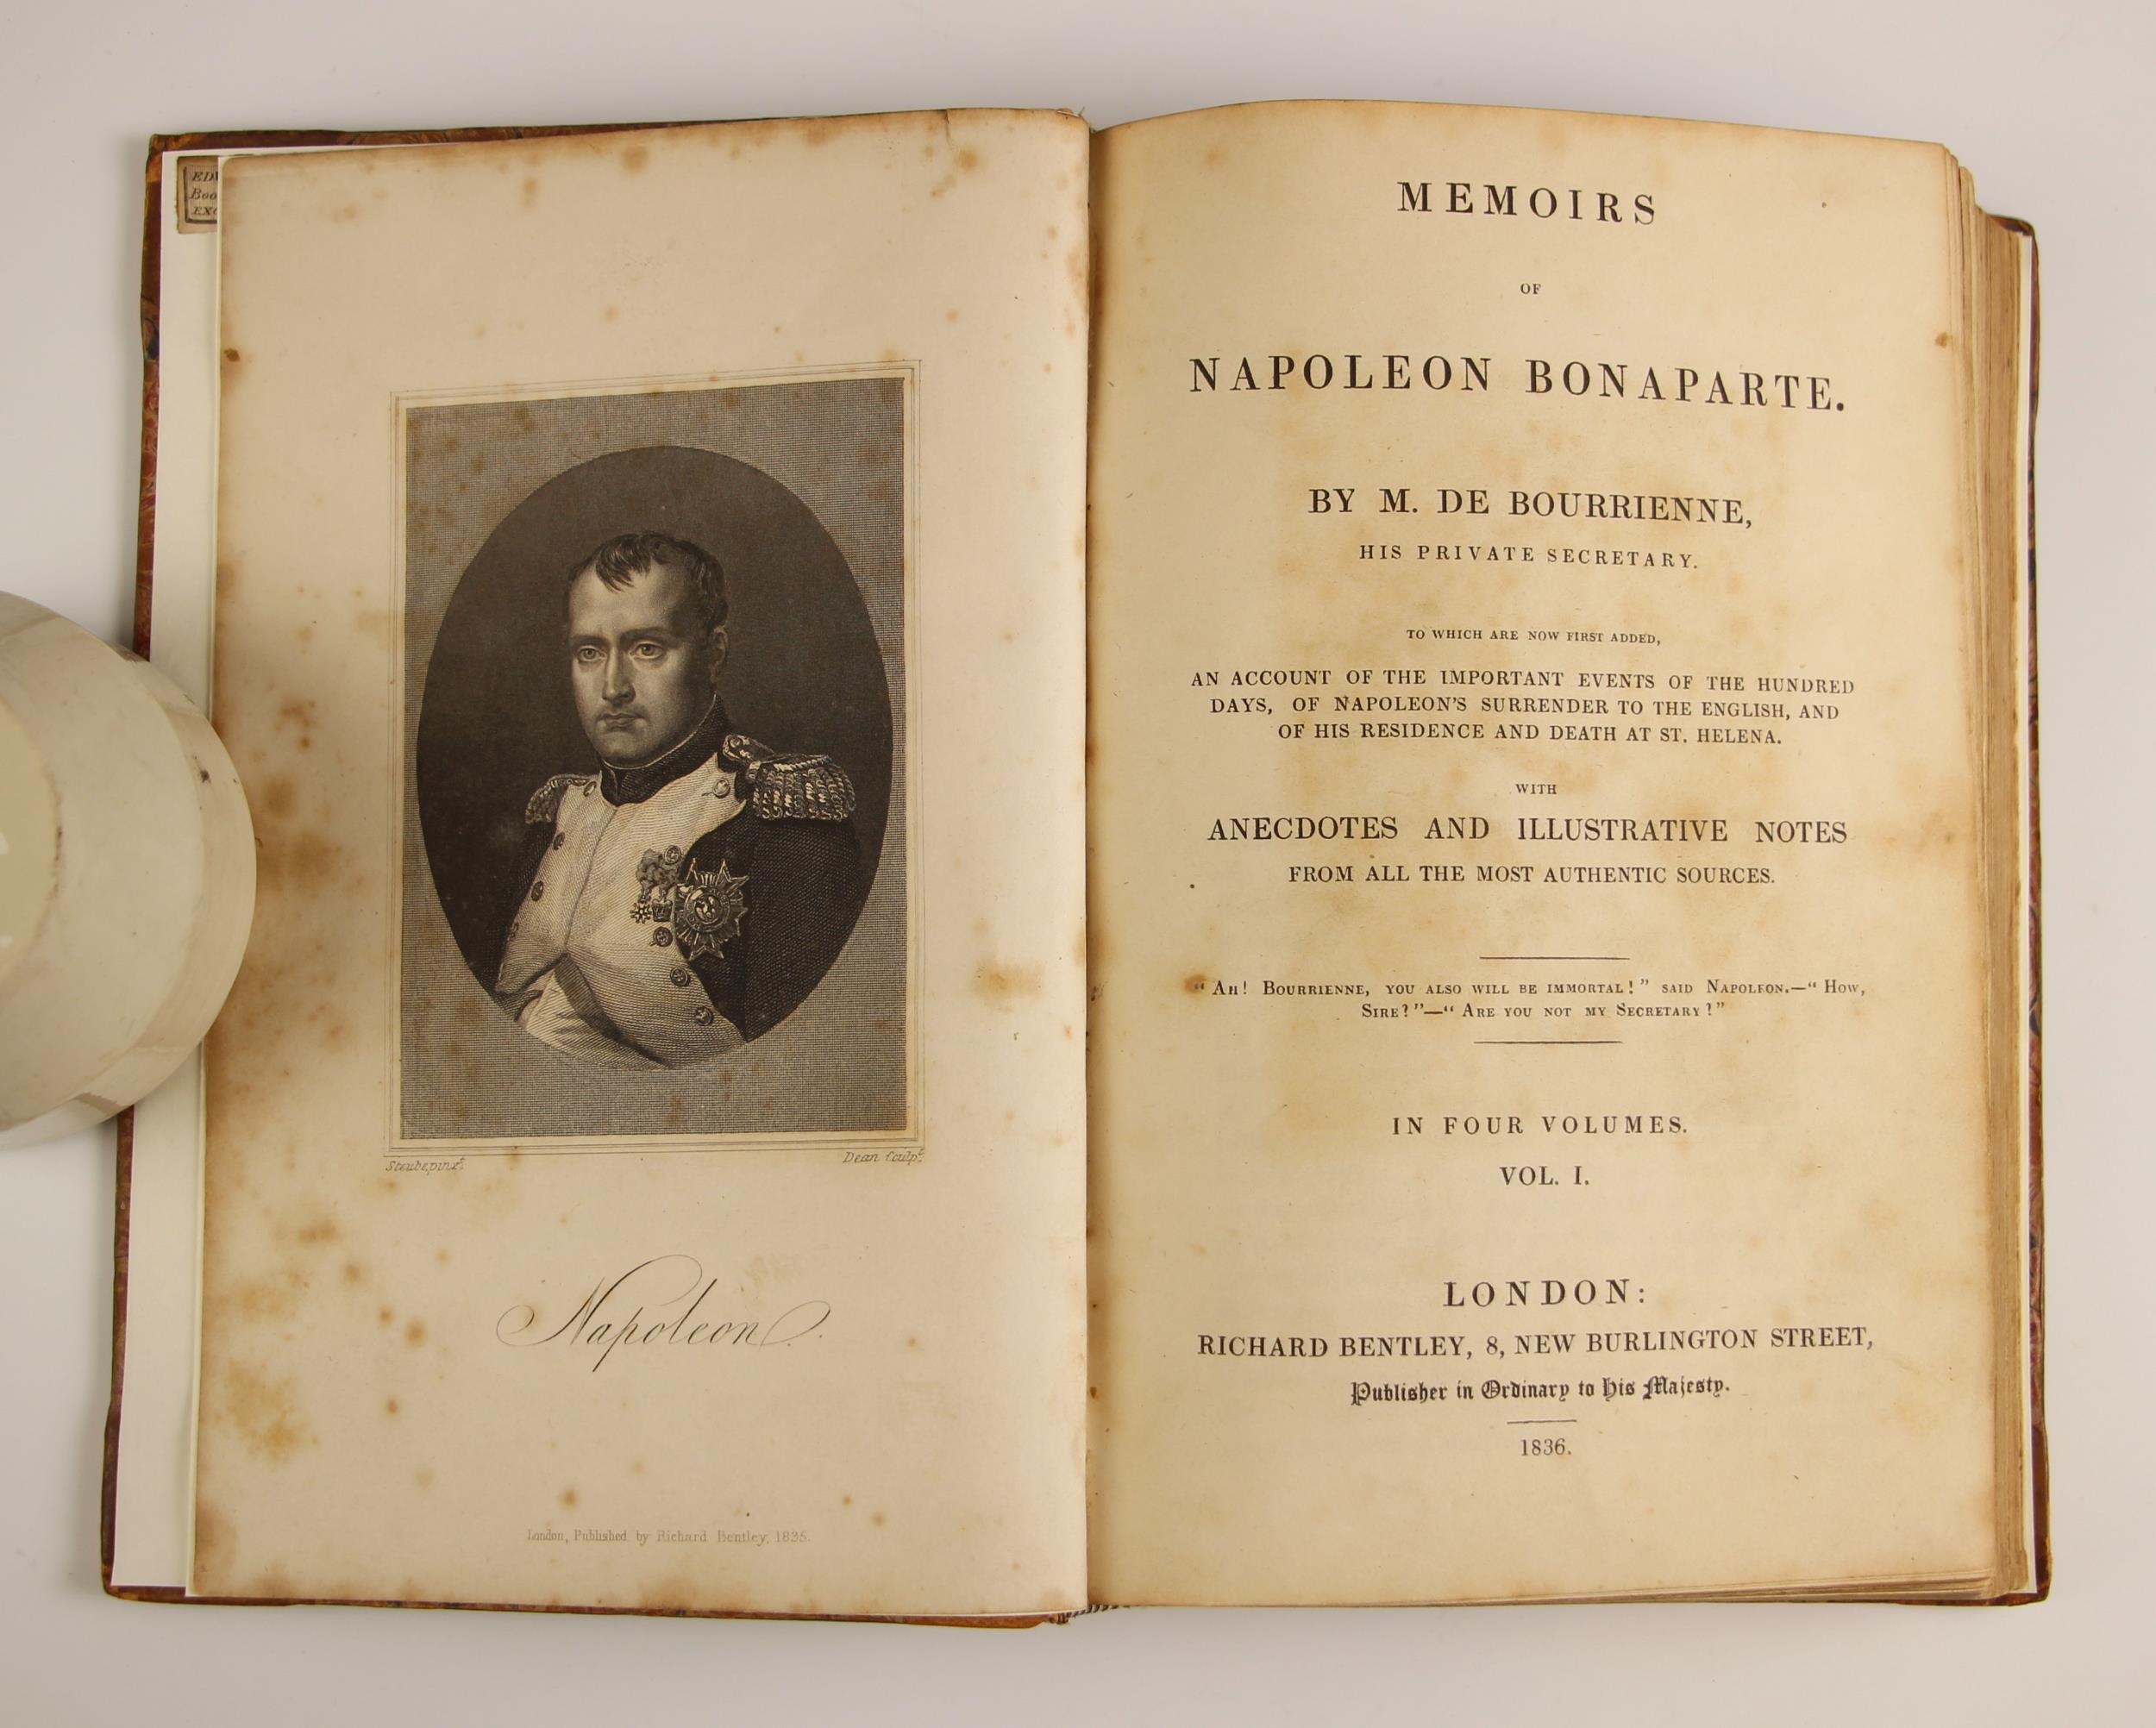 De Bourrienne (M), MEMOIRS OF NAPOLEON BONAPARTE, 4 vols, first edition, 3/4 leather (later spine - Image 2 of 6